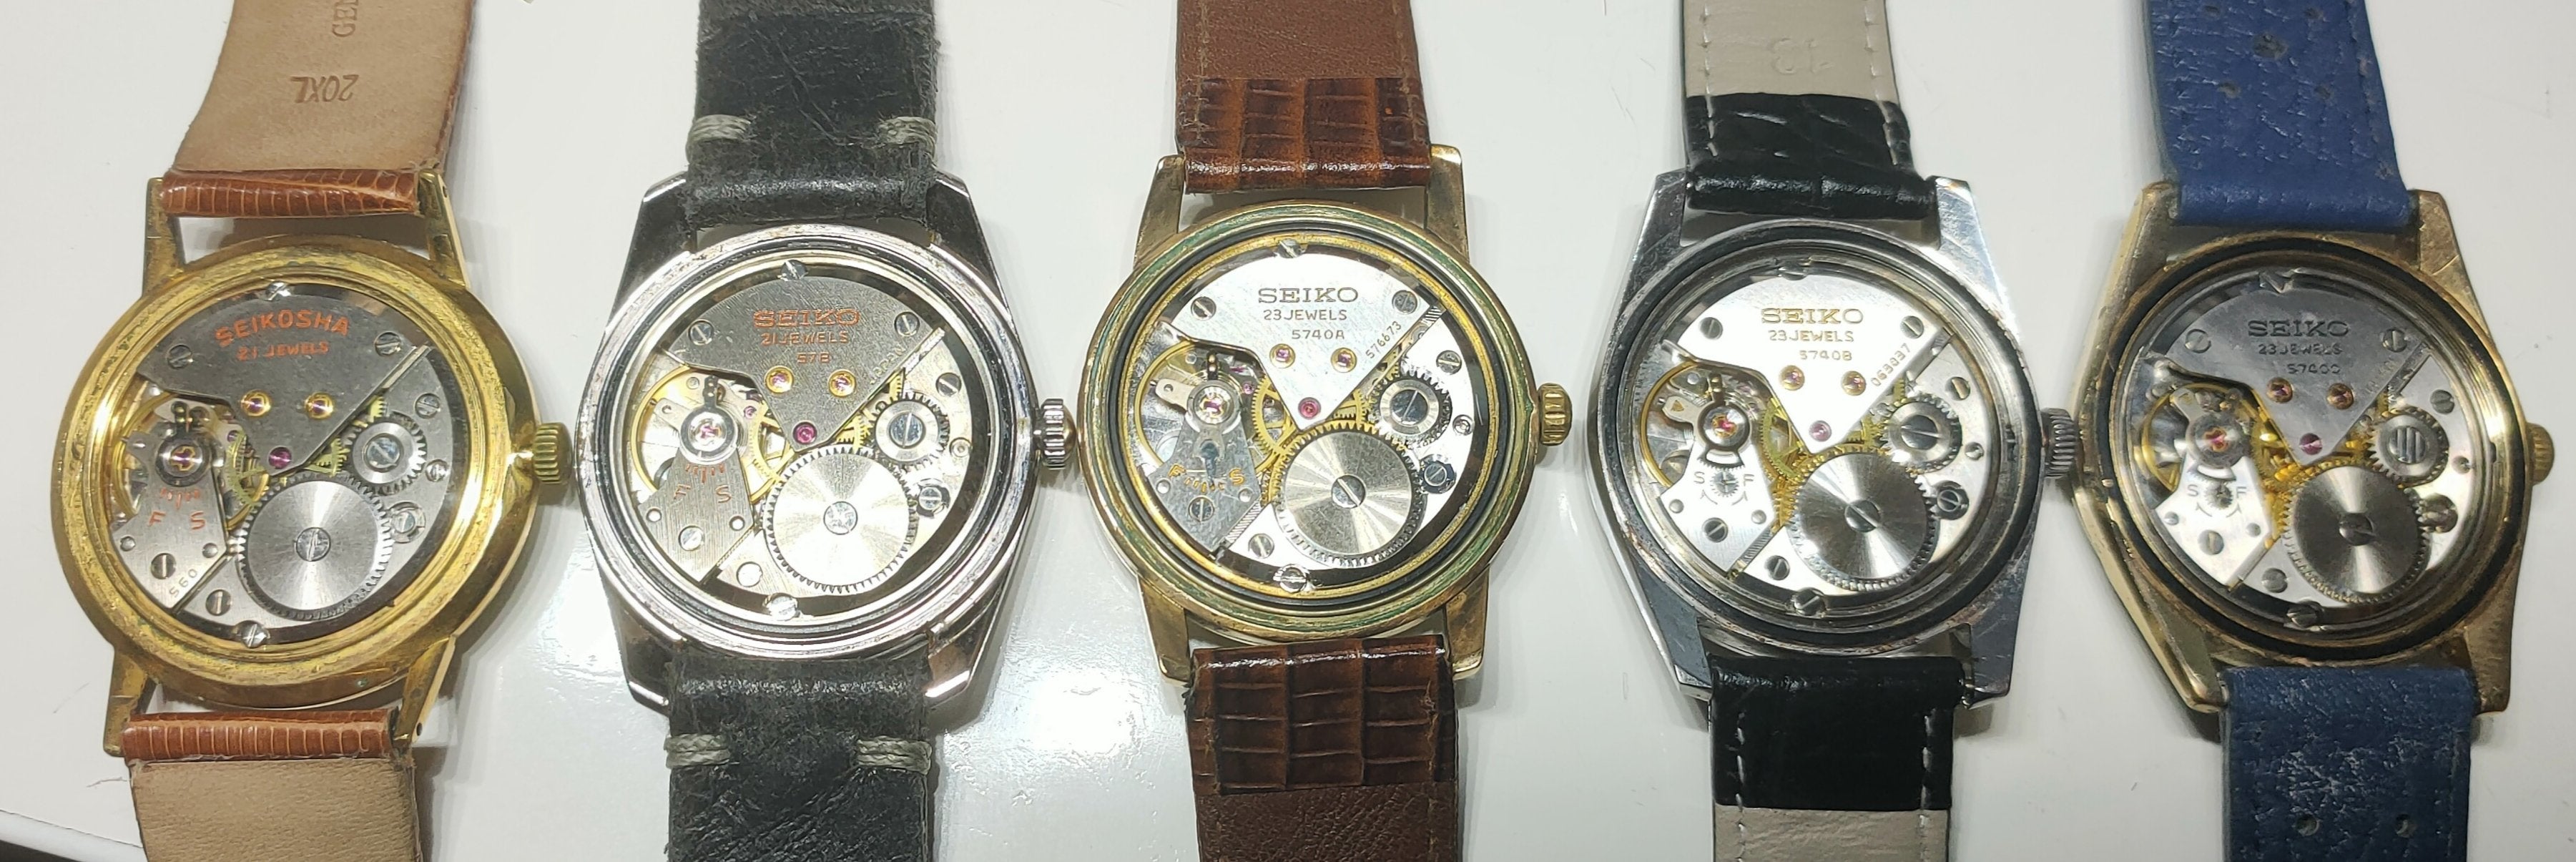 Seiko Crown 57-8010 | The Watch Site